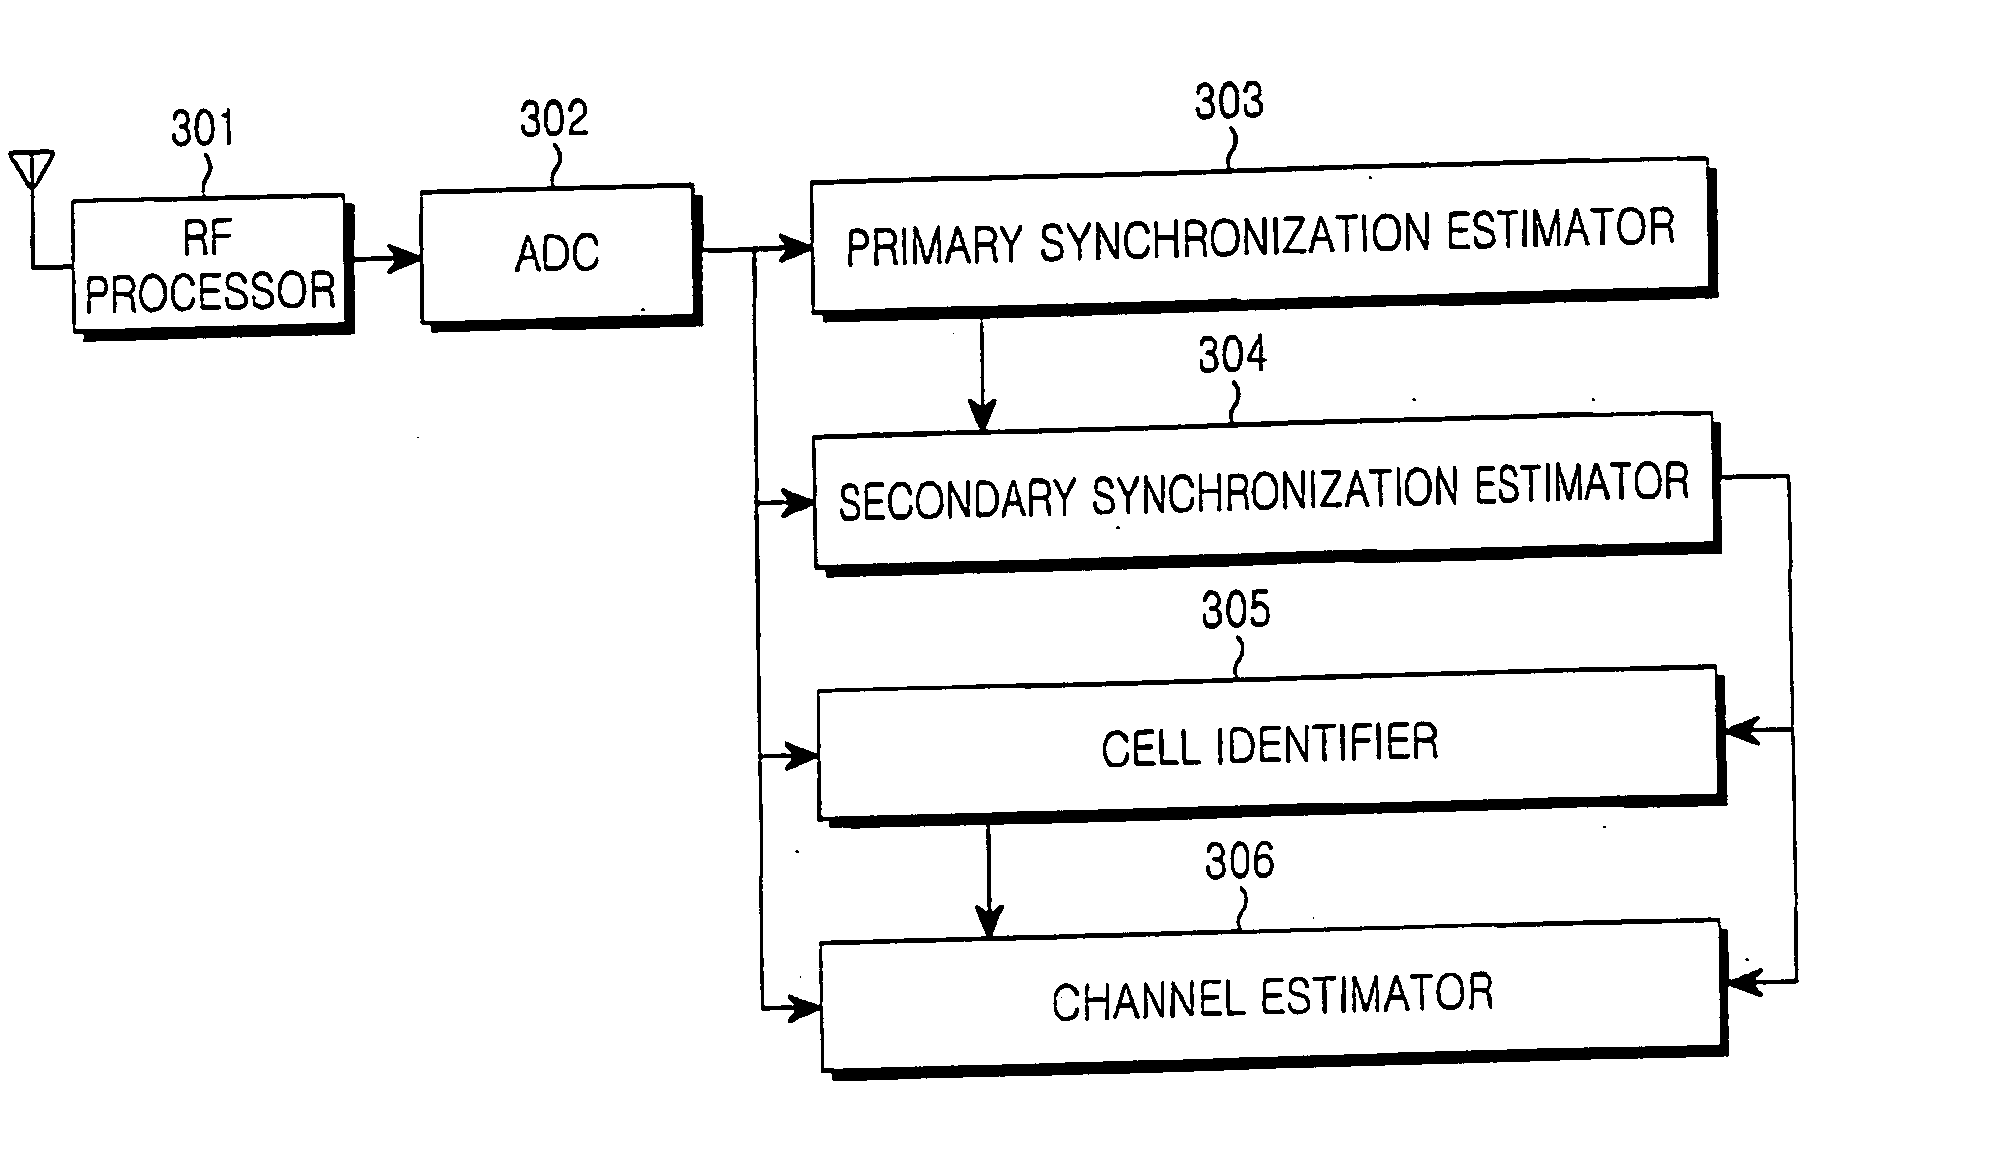 Apparatus and method for transmitting/receiving preamble signal in a wireless communication system